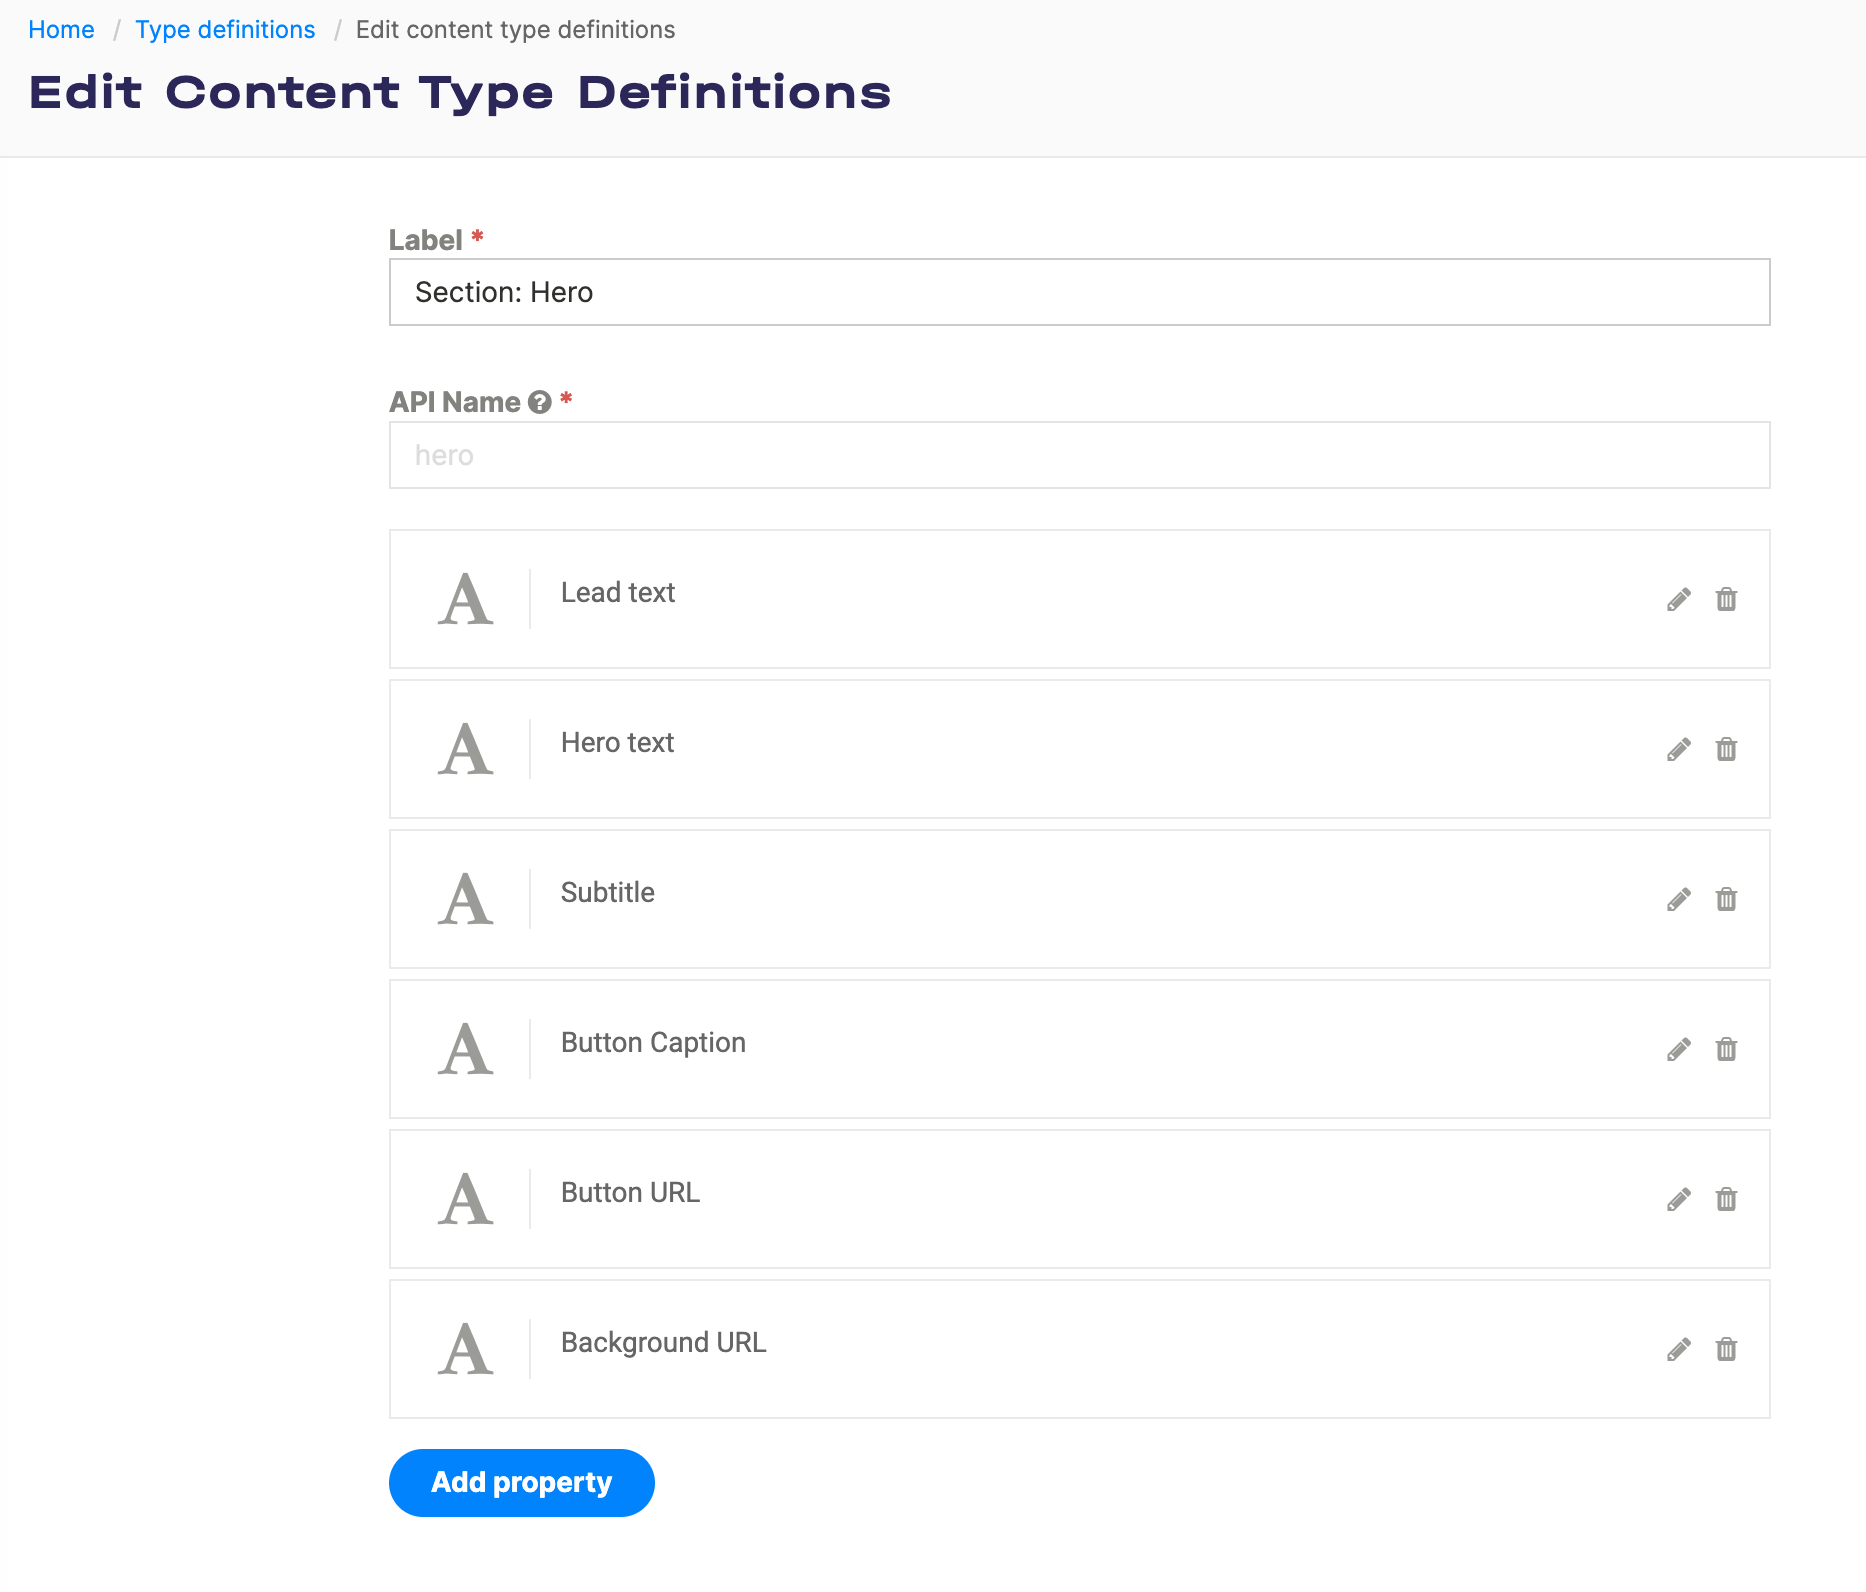 Content type definition for a Hero section component